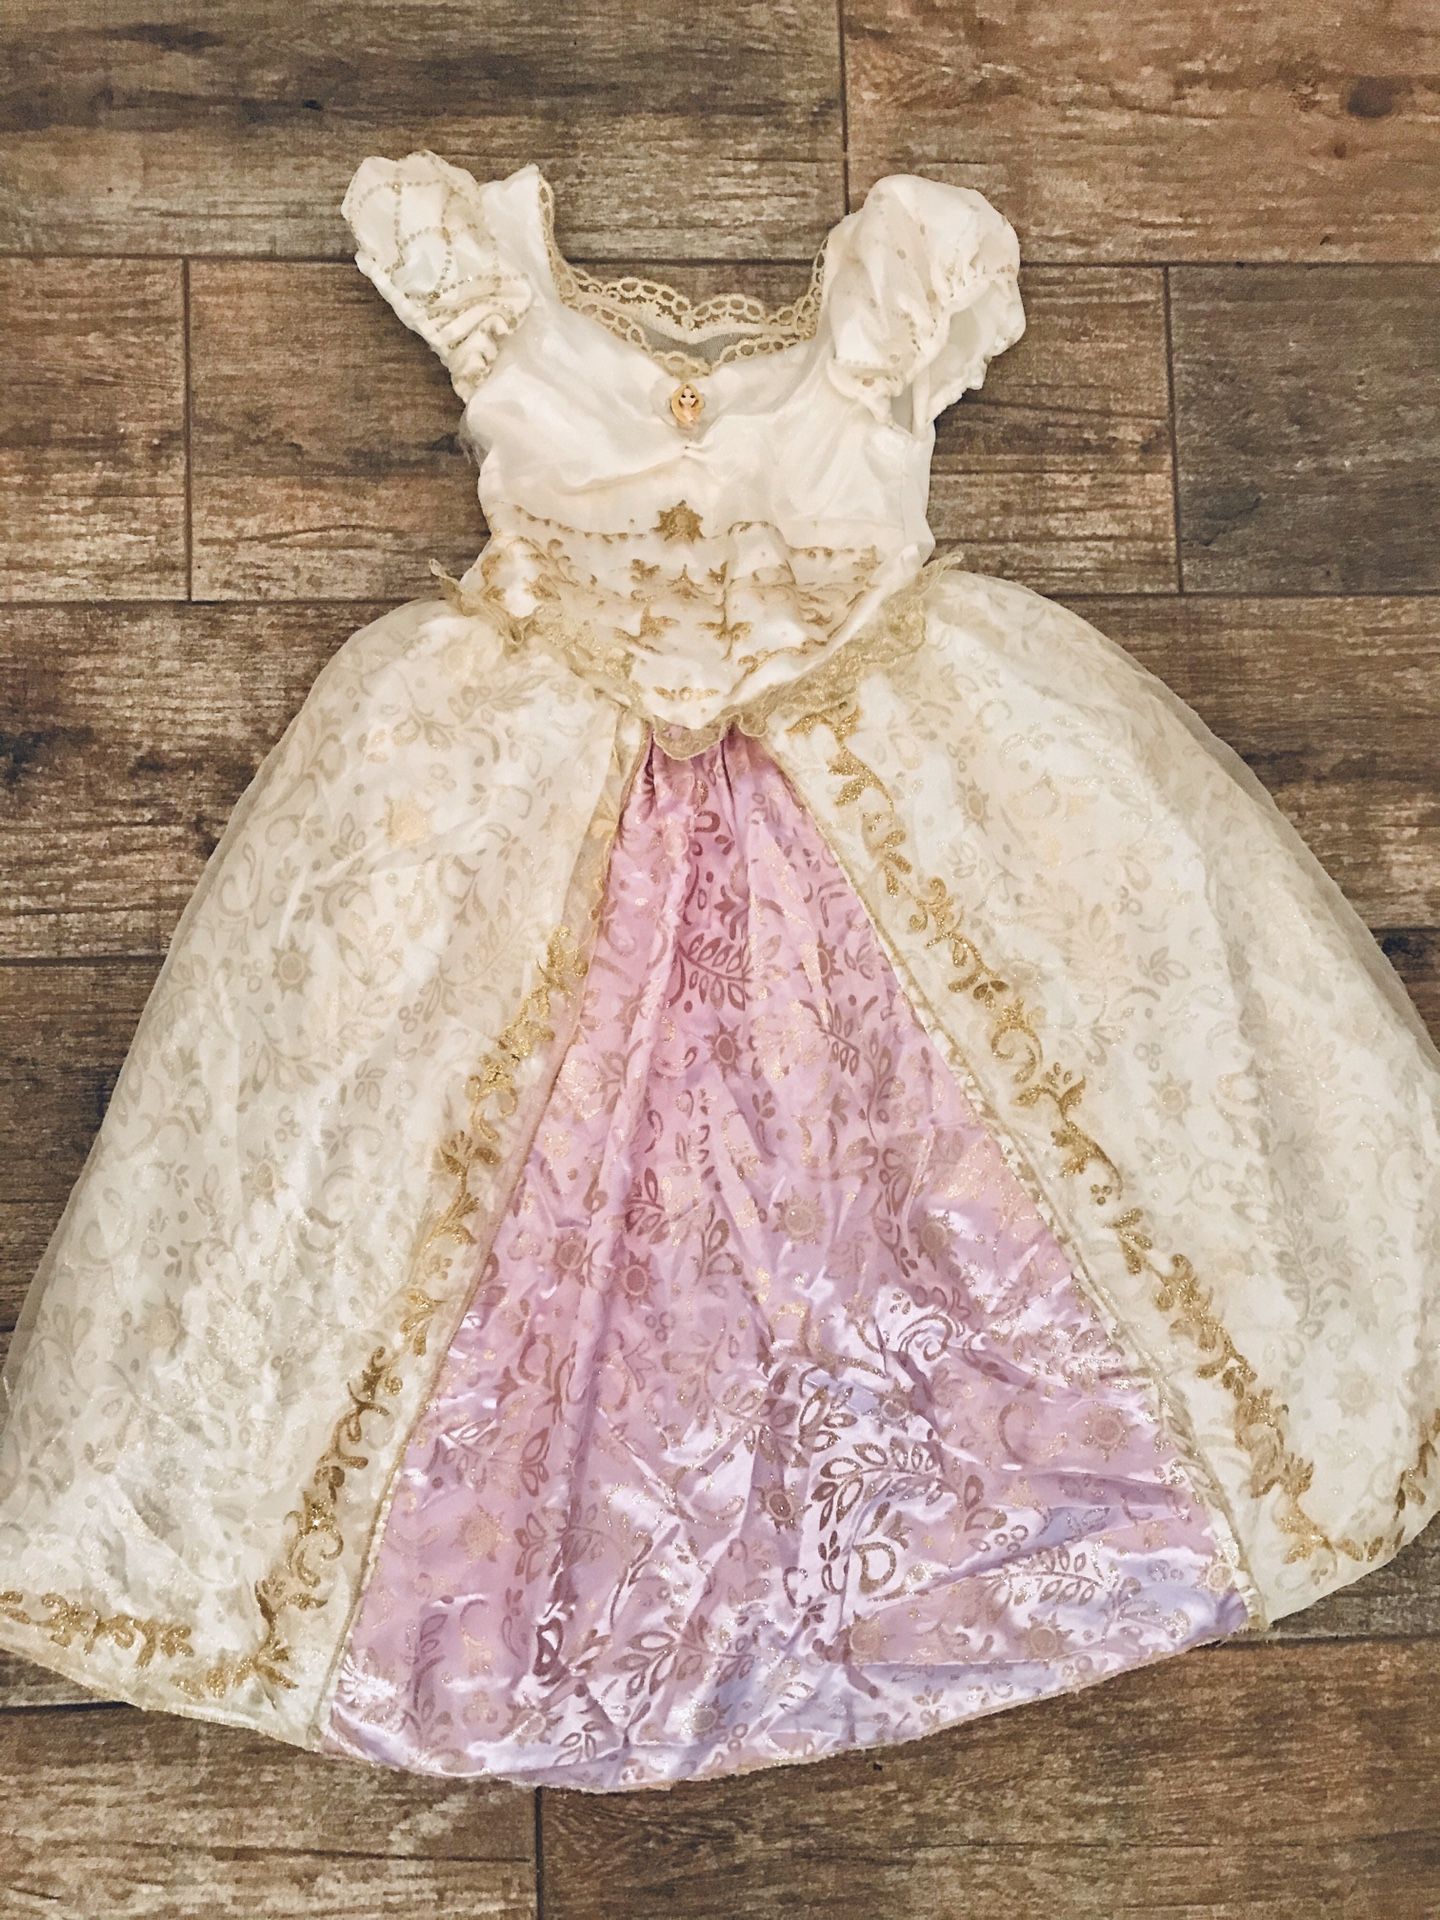 Princess Rapunzel - Tangled - Wedding Dress - Disney Store - Size XS (4) •If Is Posted Is Available•